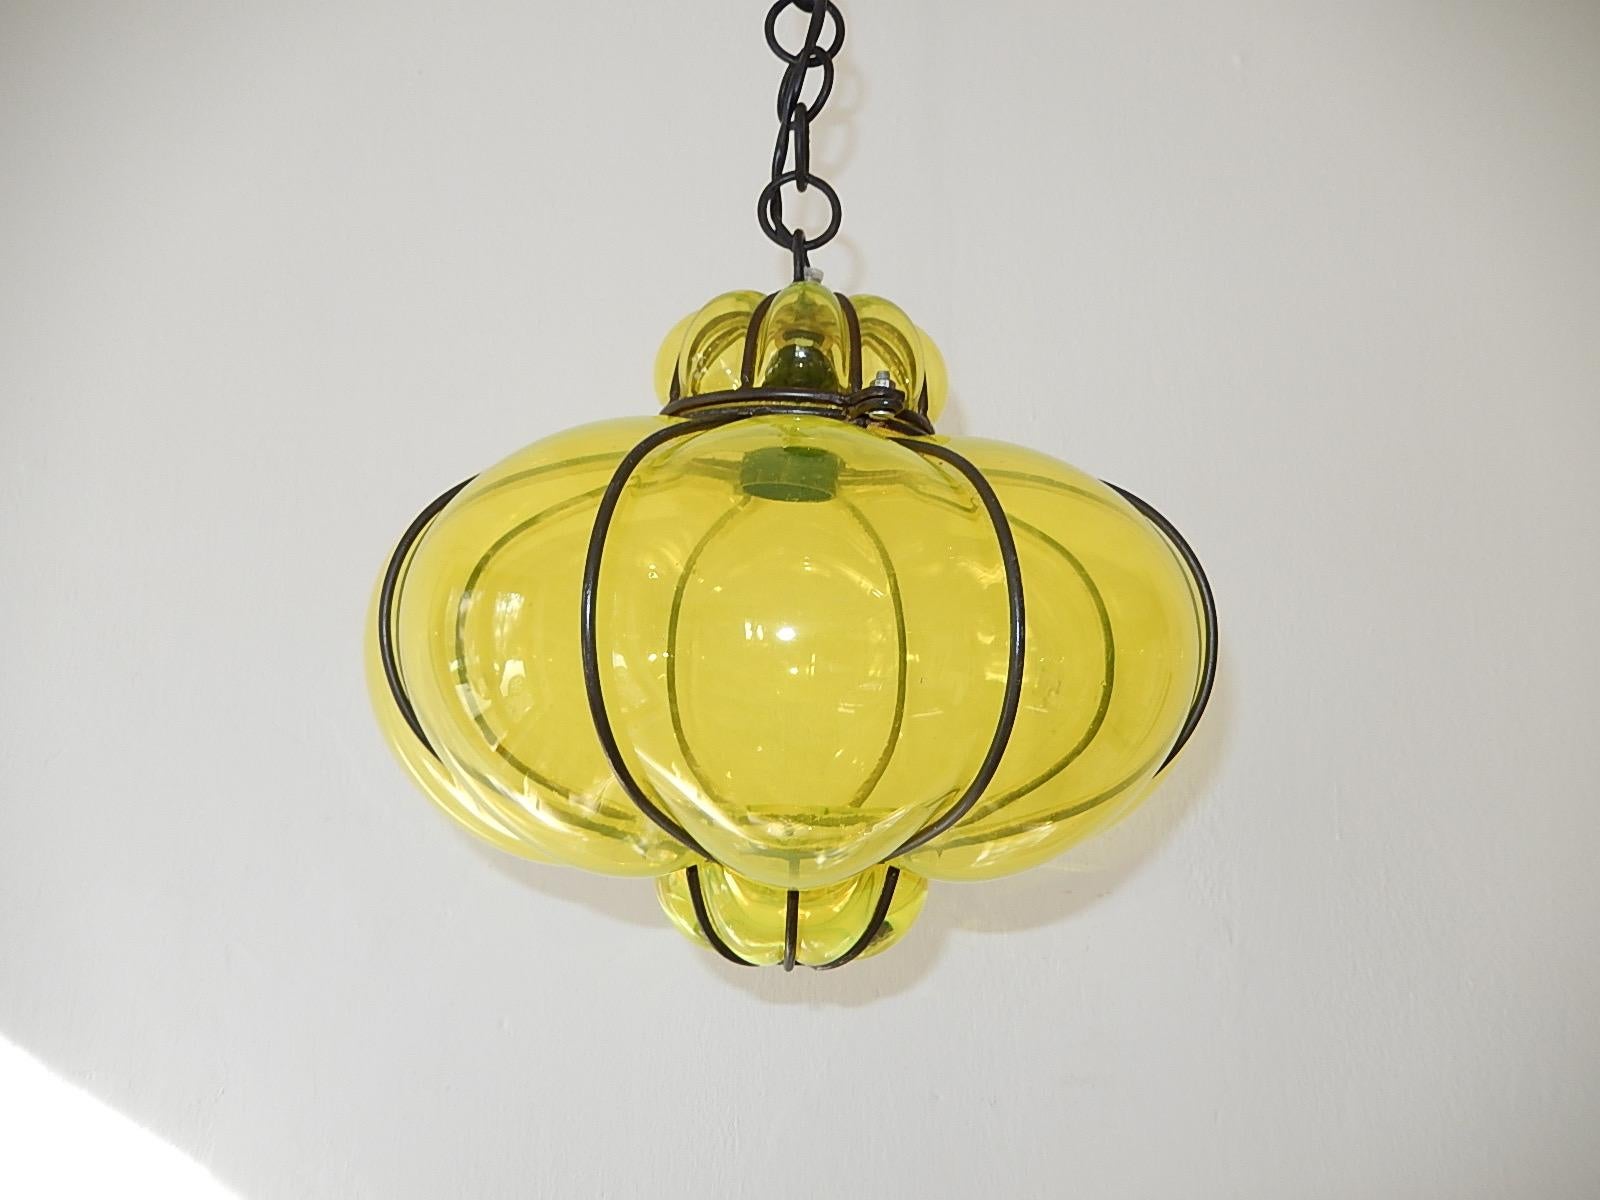 Housing one-light. Rare neon yellow Murano blown glass. Great craftsmanship. Re-wired and ready to hang with appropriate socket. Rare shape. Free priority UPS shipping from Italy. Adding another 14 inches of original chain and canopy.